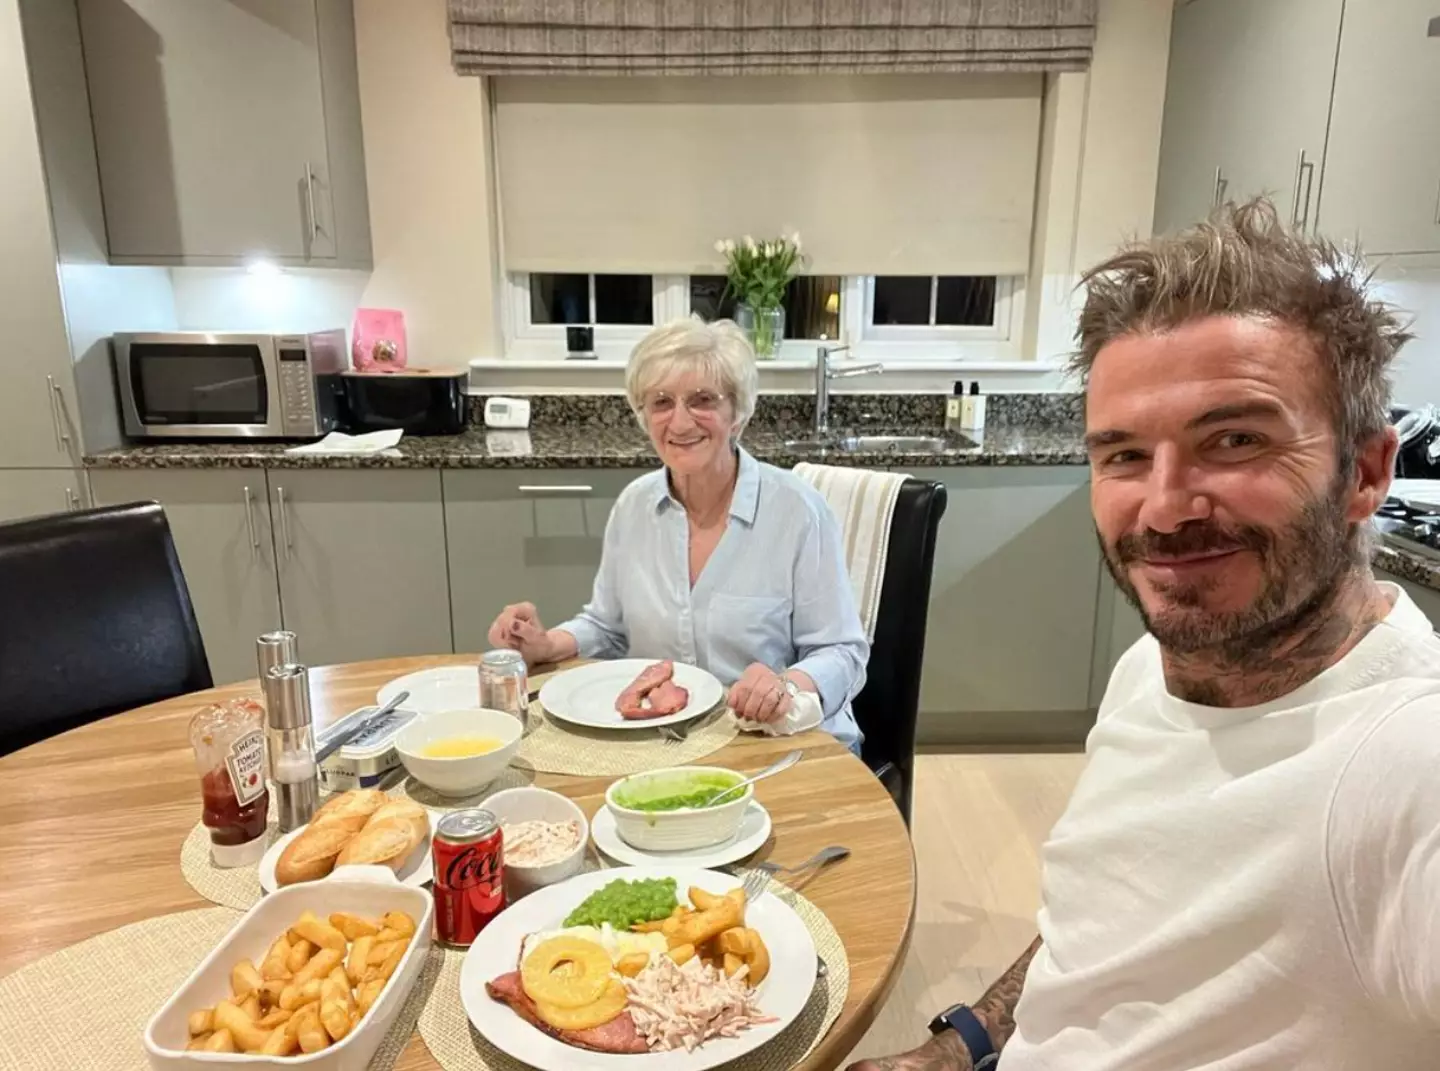 Becks previously said he 'can't beat' dinner with his mum.